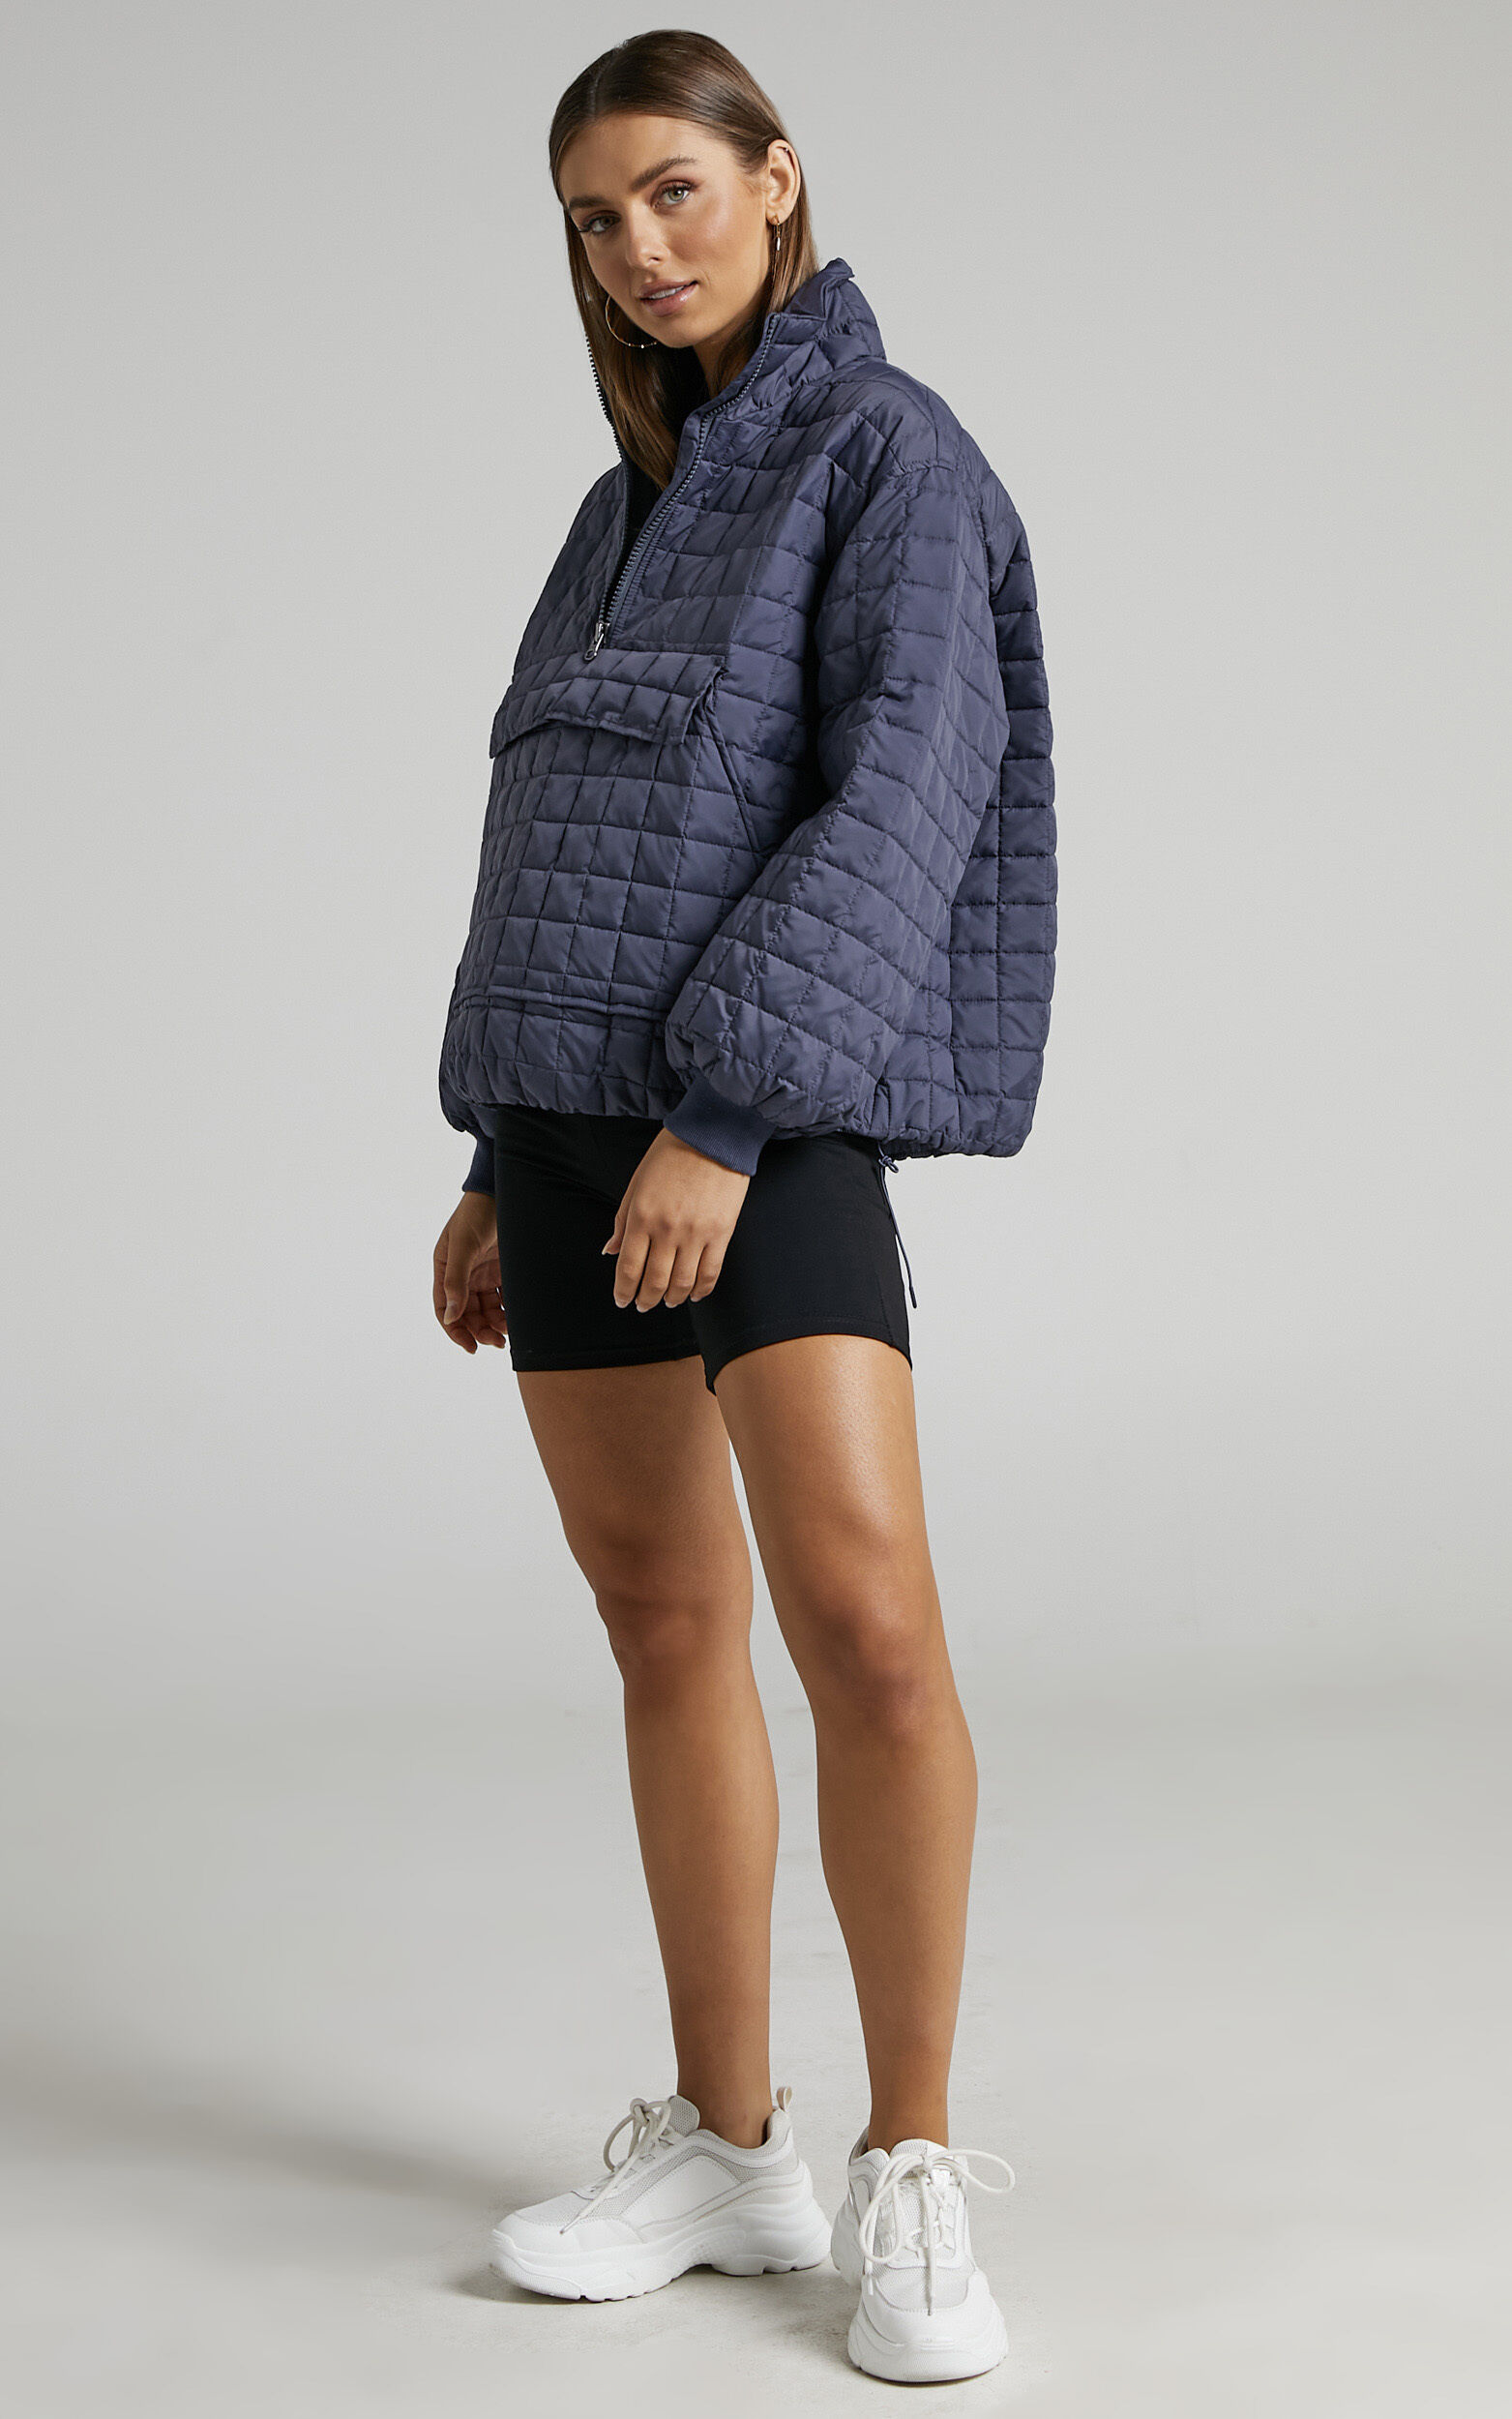 Levi's - Sidel Quilted Jacket in Odessey Grey | Showpo